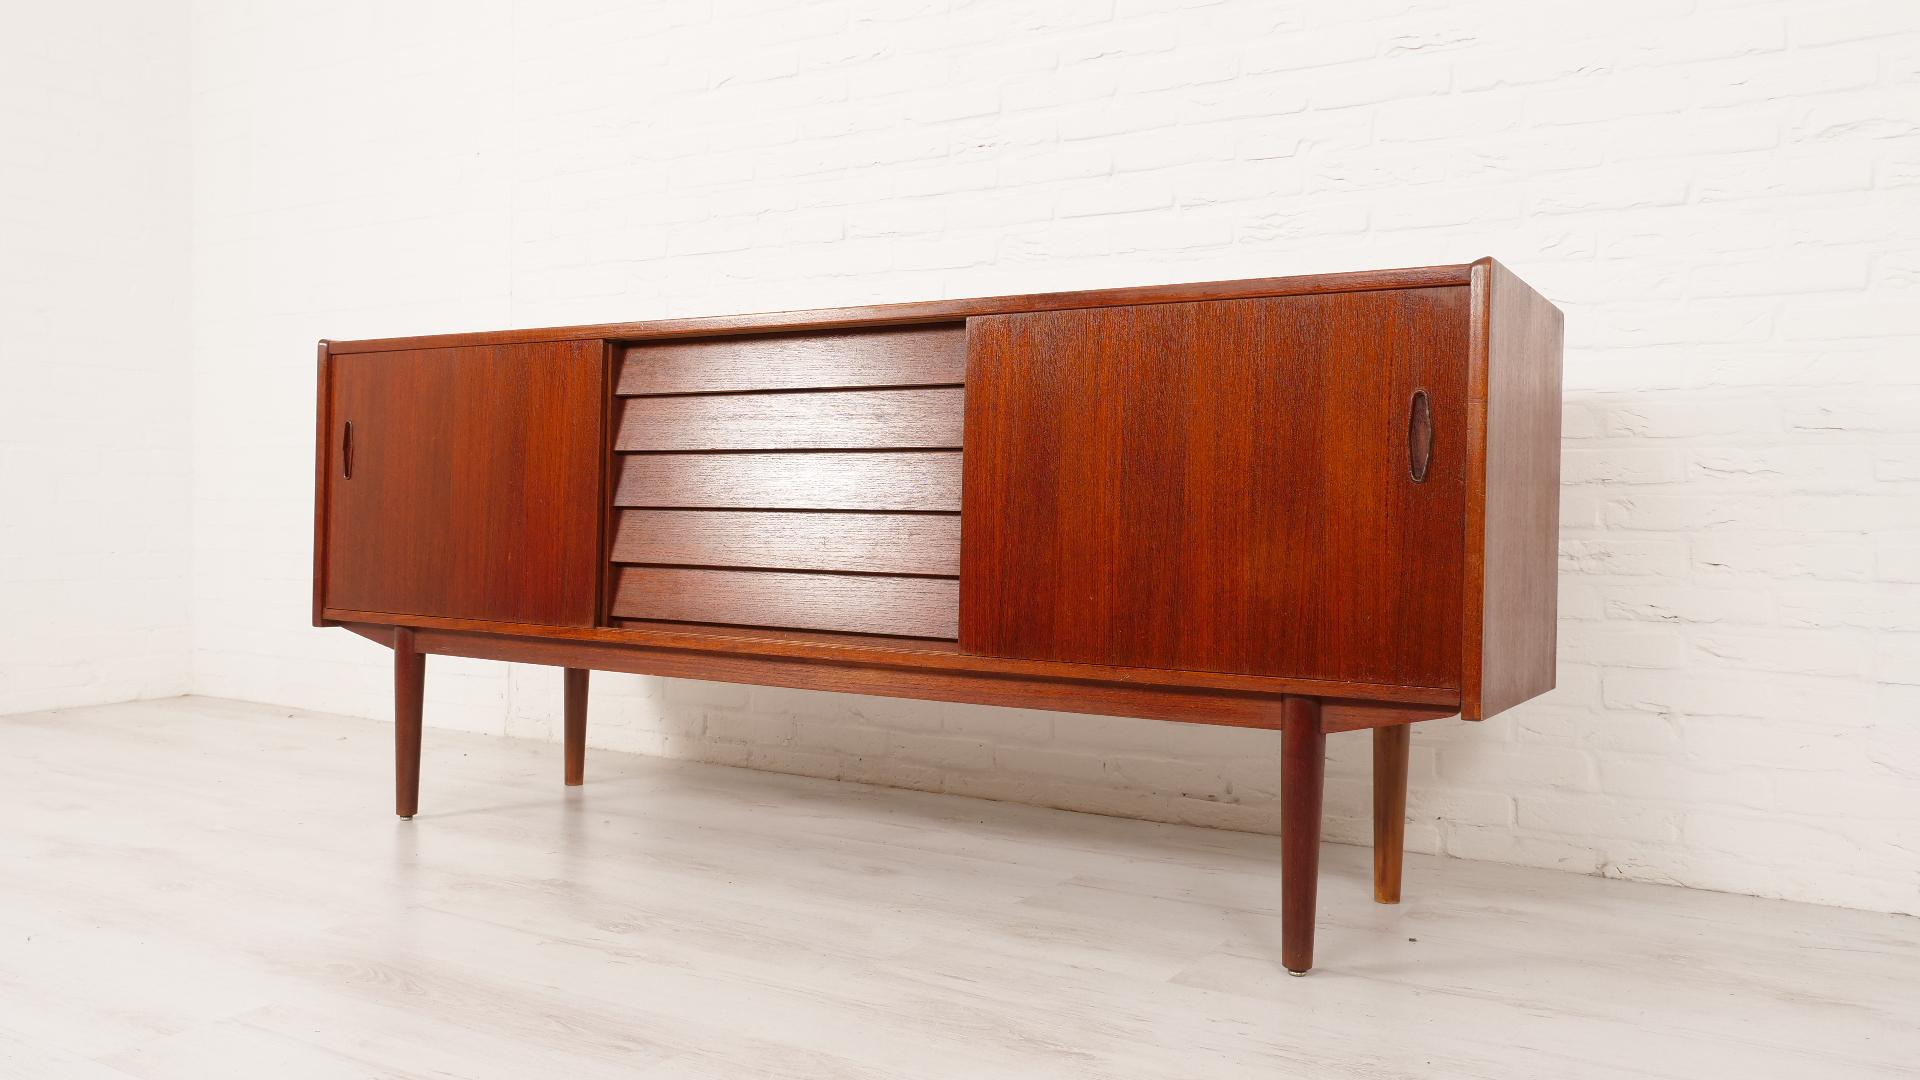 A truly beautiful sideboard by Hugo Troeds, designed by Nils Jonsson in the 1950s, this stylish sideboard comes from Sweden. The vintage sideboard has 2 sliding doors that slide very smoothly. In the middle, it has 5 drawers designed with dovetail